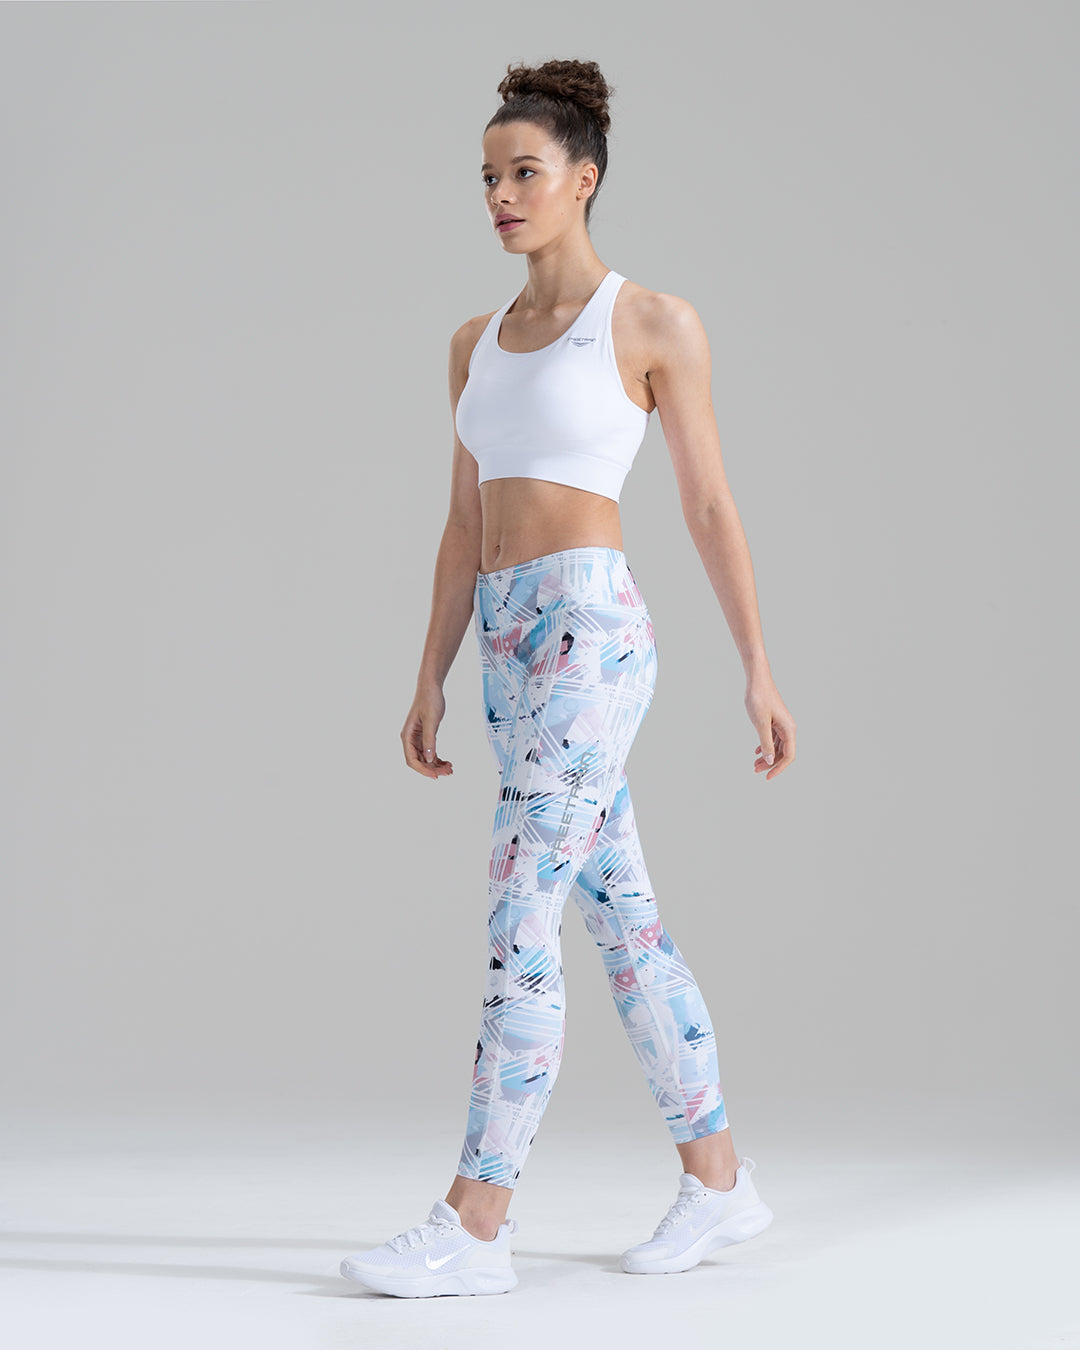 Mid-rise Leggings Abstract All Over Print - FlowState Energy Speed